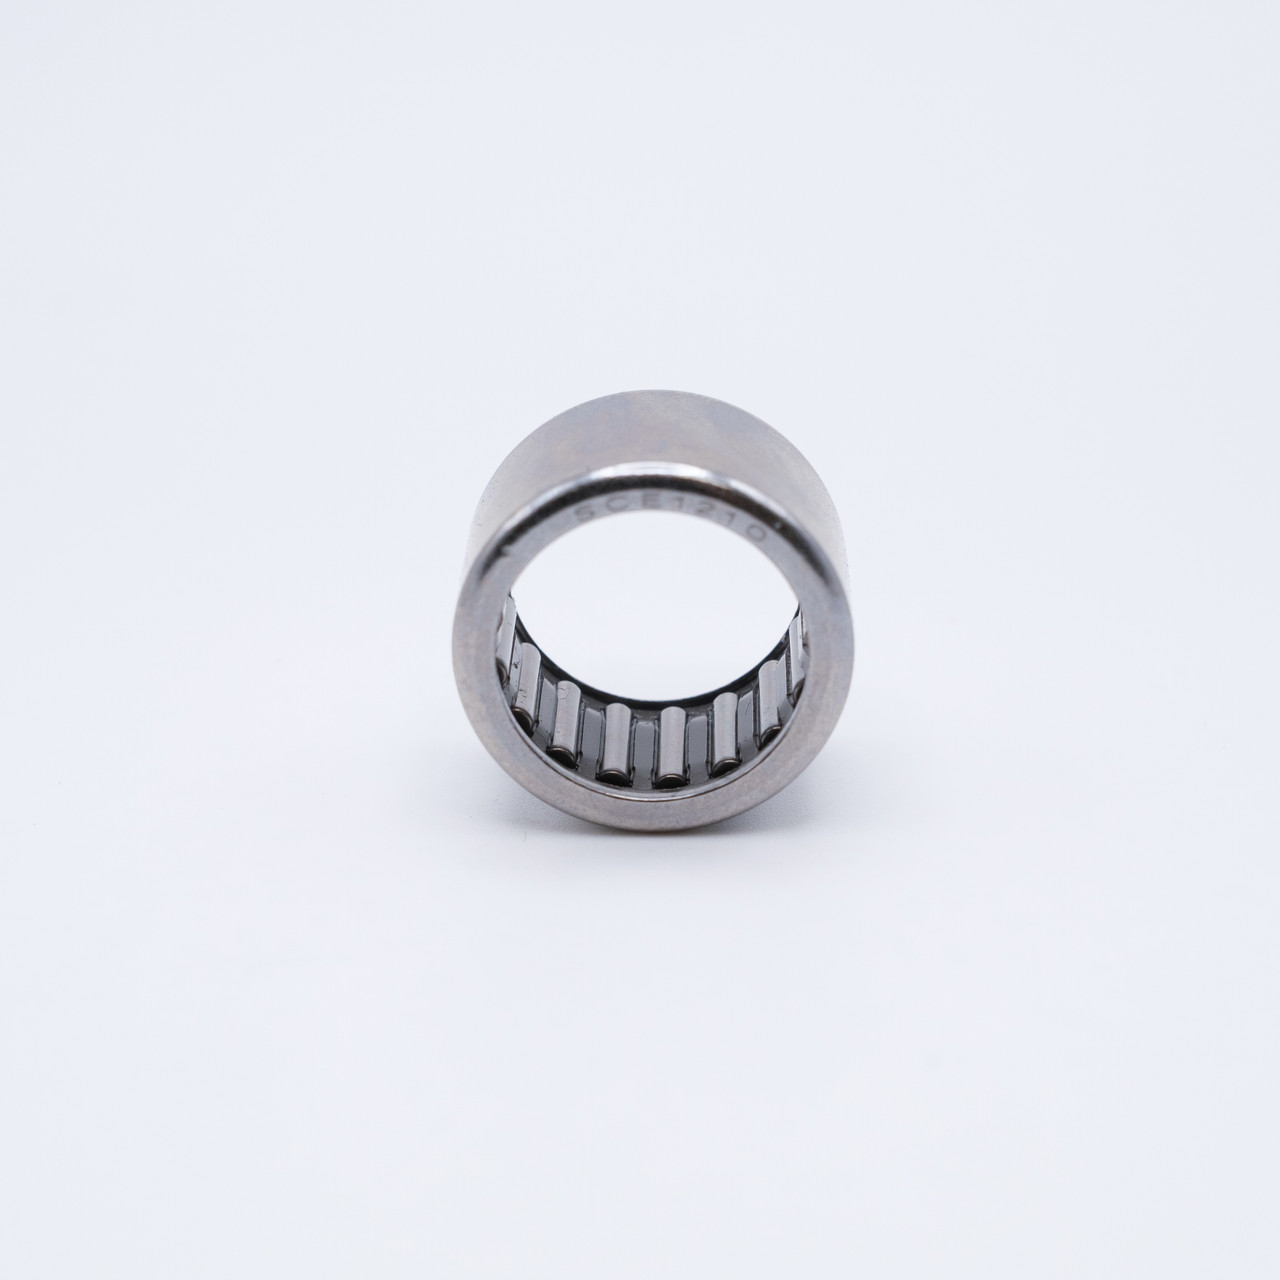 BA-2010Z IKO Needle Rollers Bearing 1-1/4x1-1/2x5/8 Front View